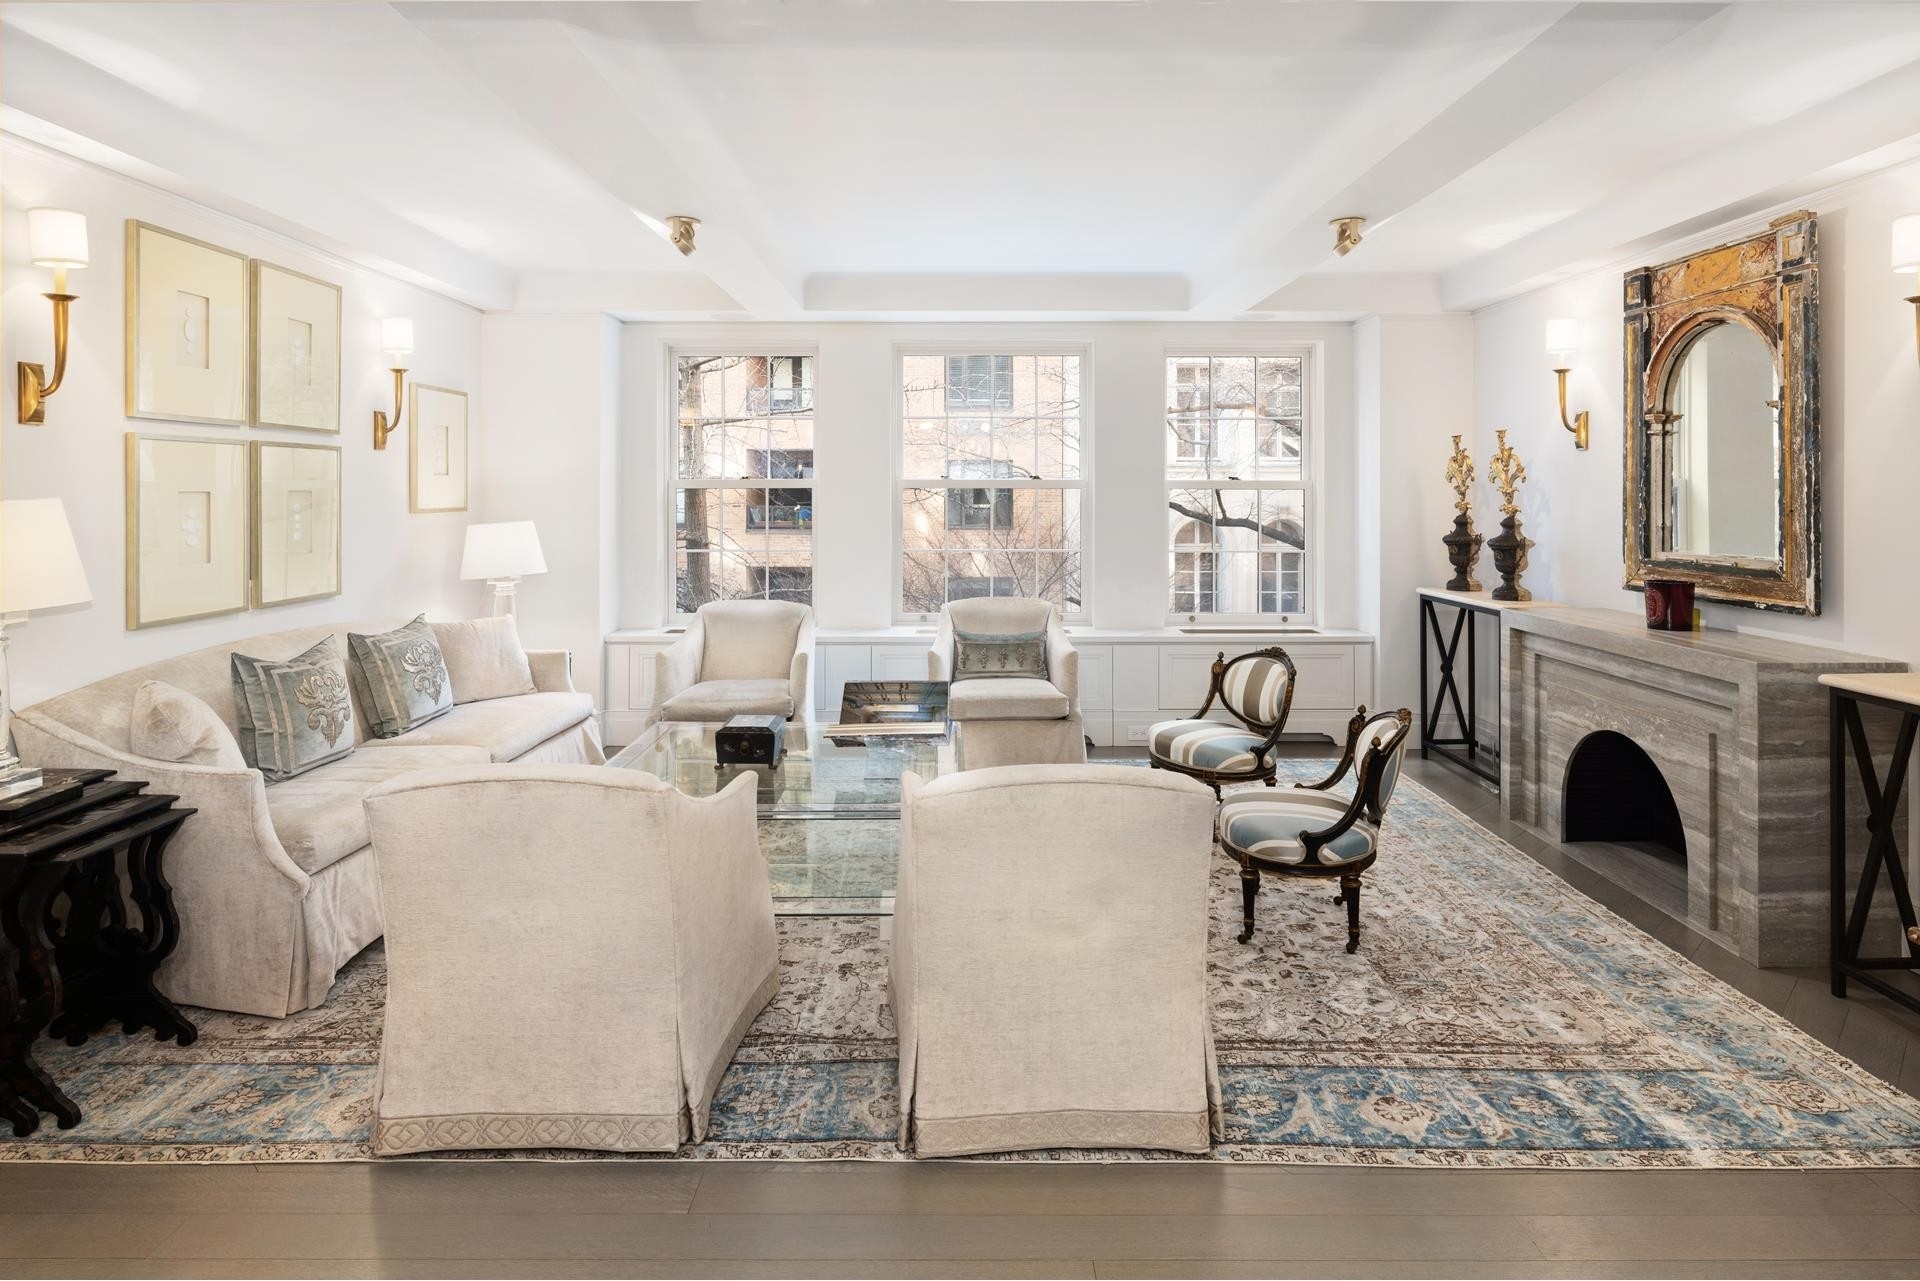 Co-op Properties for Sale at The Volney, 23 E 74TH ST, 3FG4G Lenox Hill, New York, New York 10021